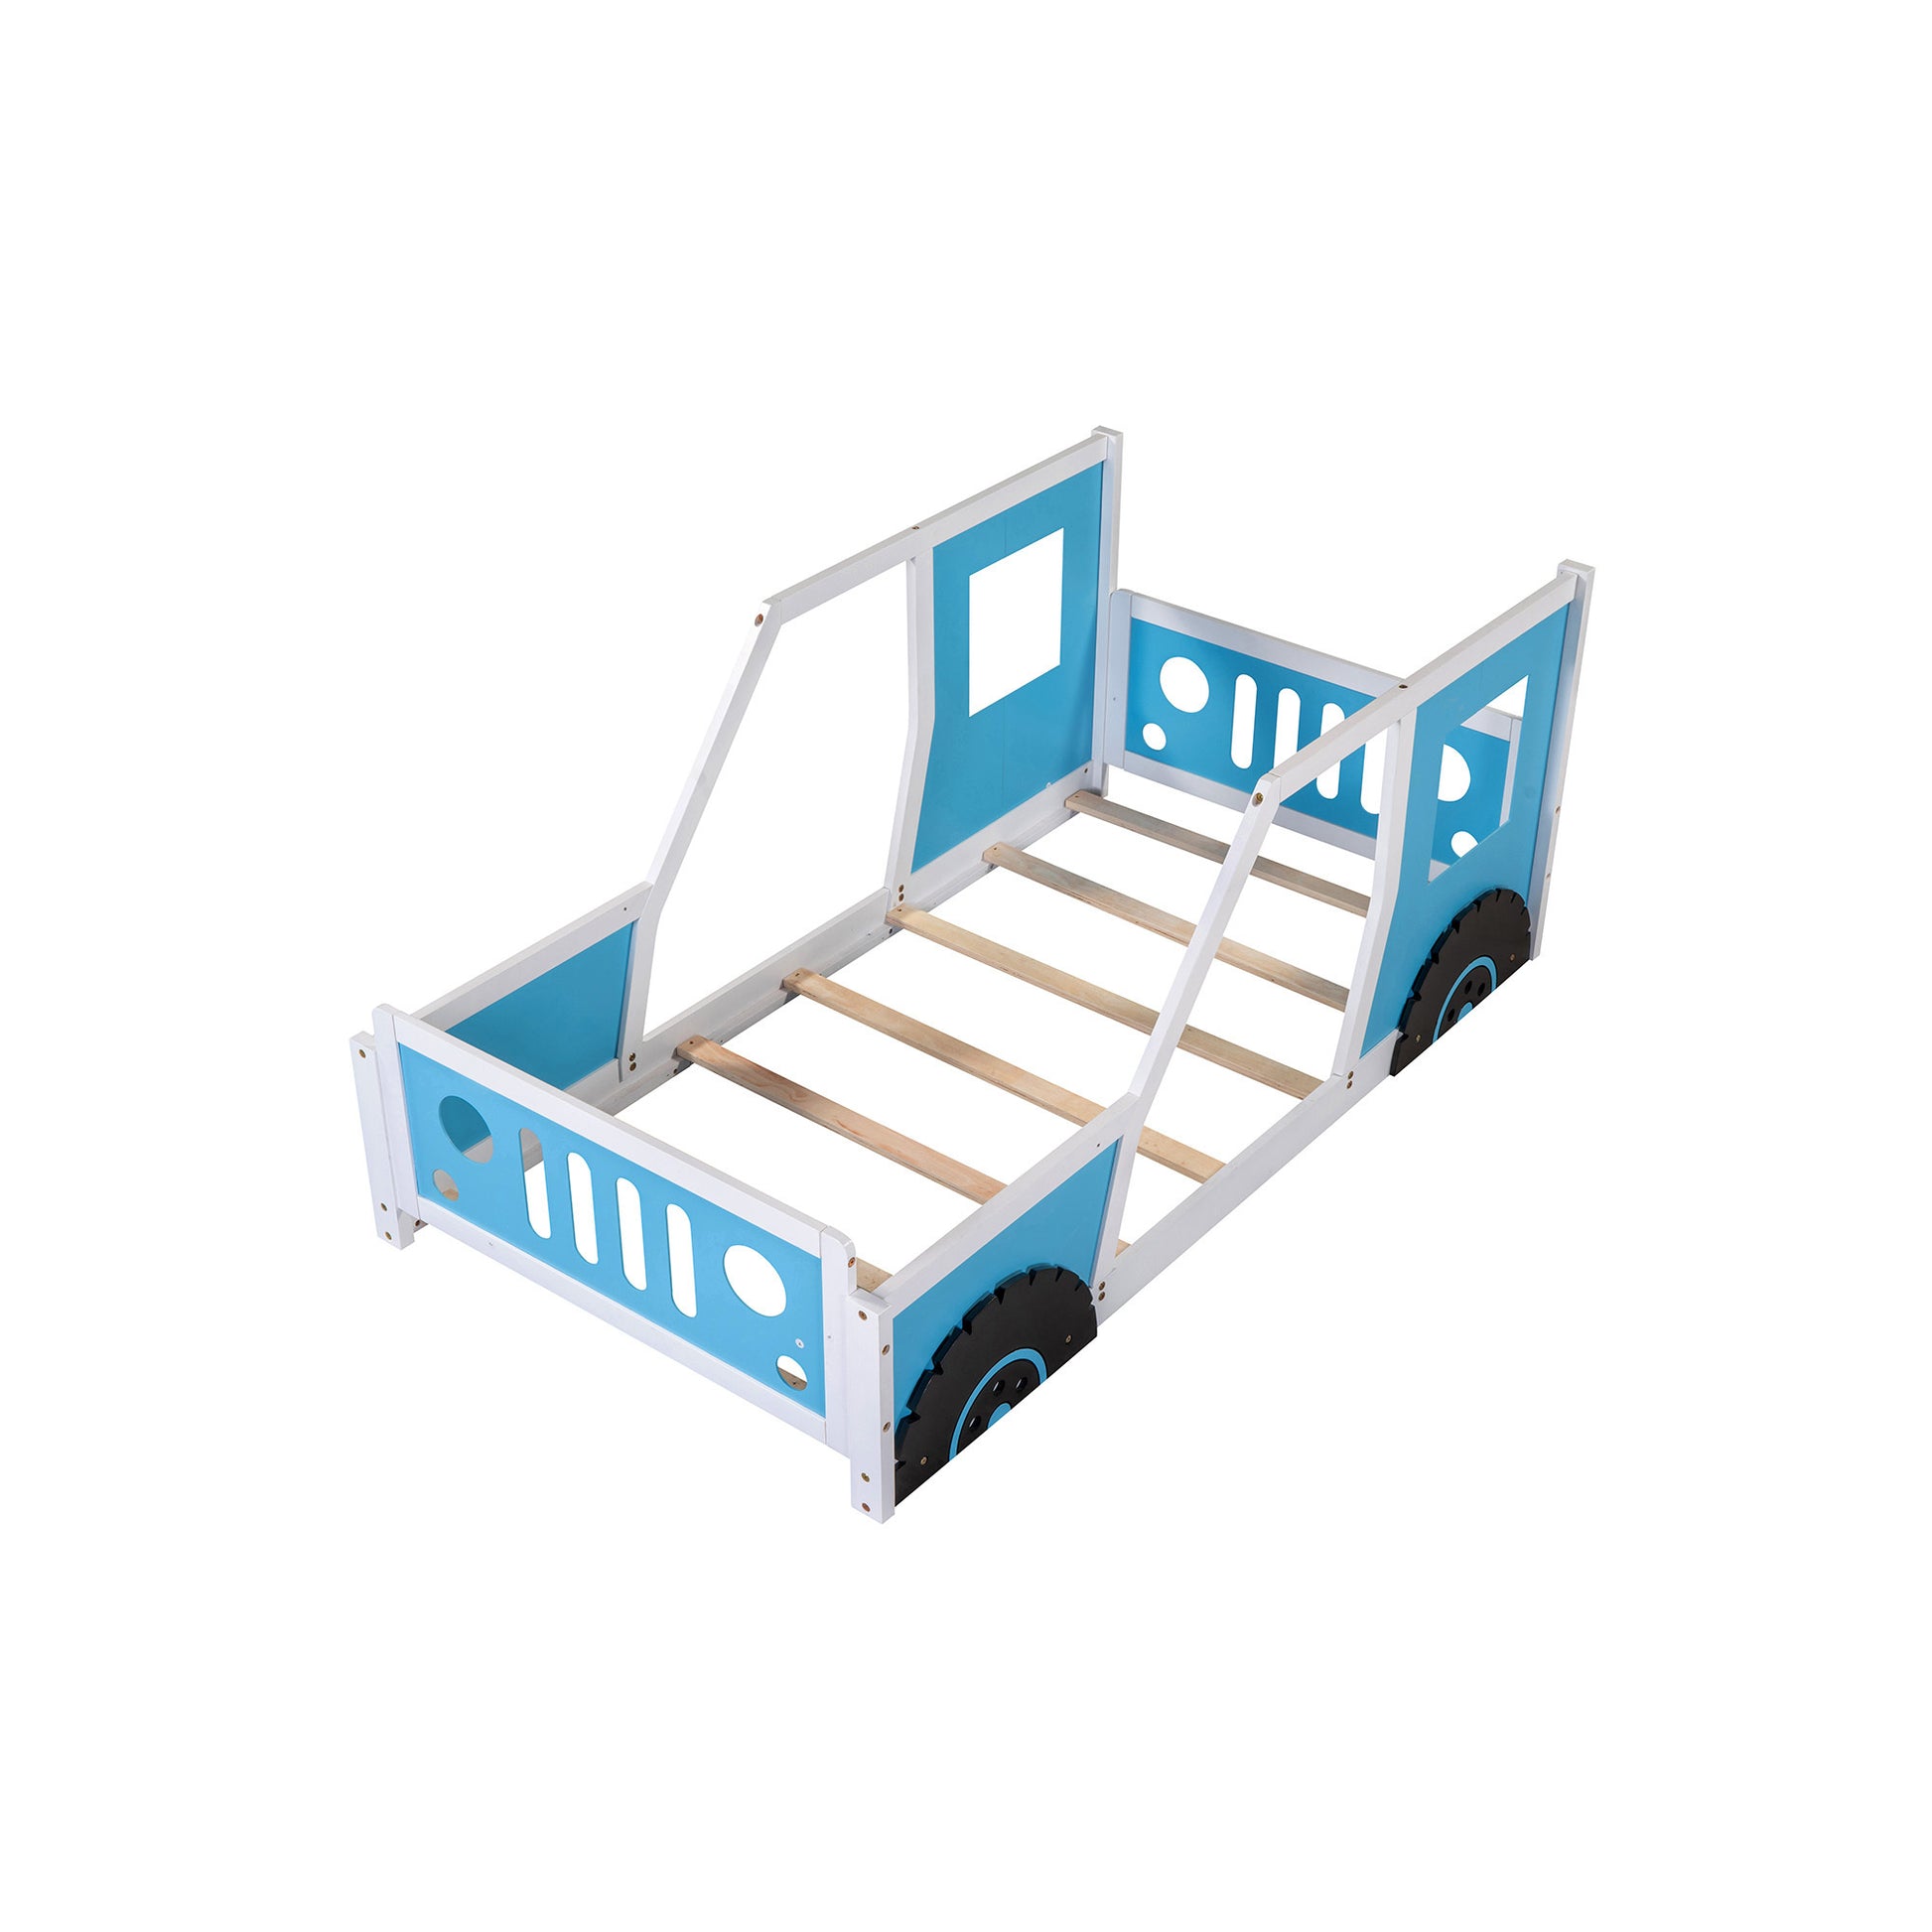 Twin Size Classic Car-Shaped Platform Bed with Wheels,Blue